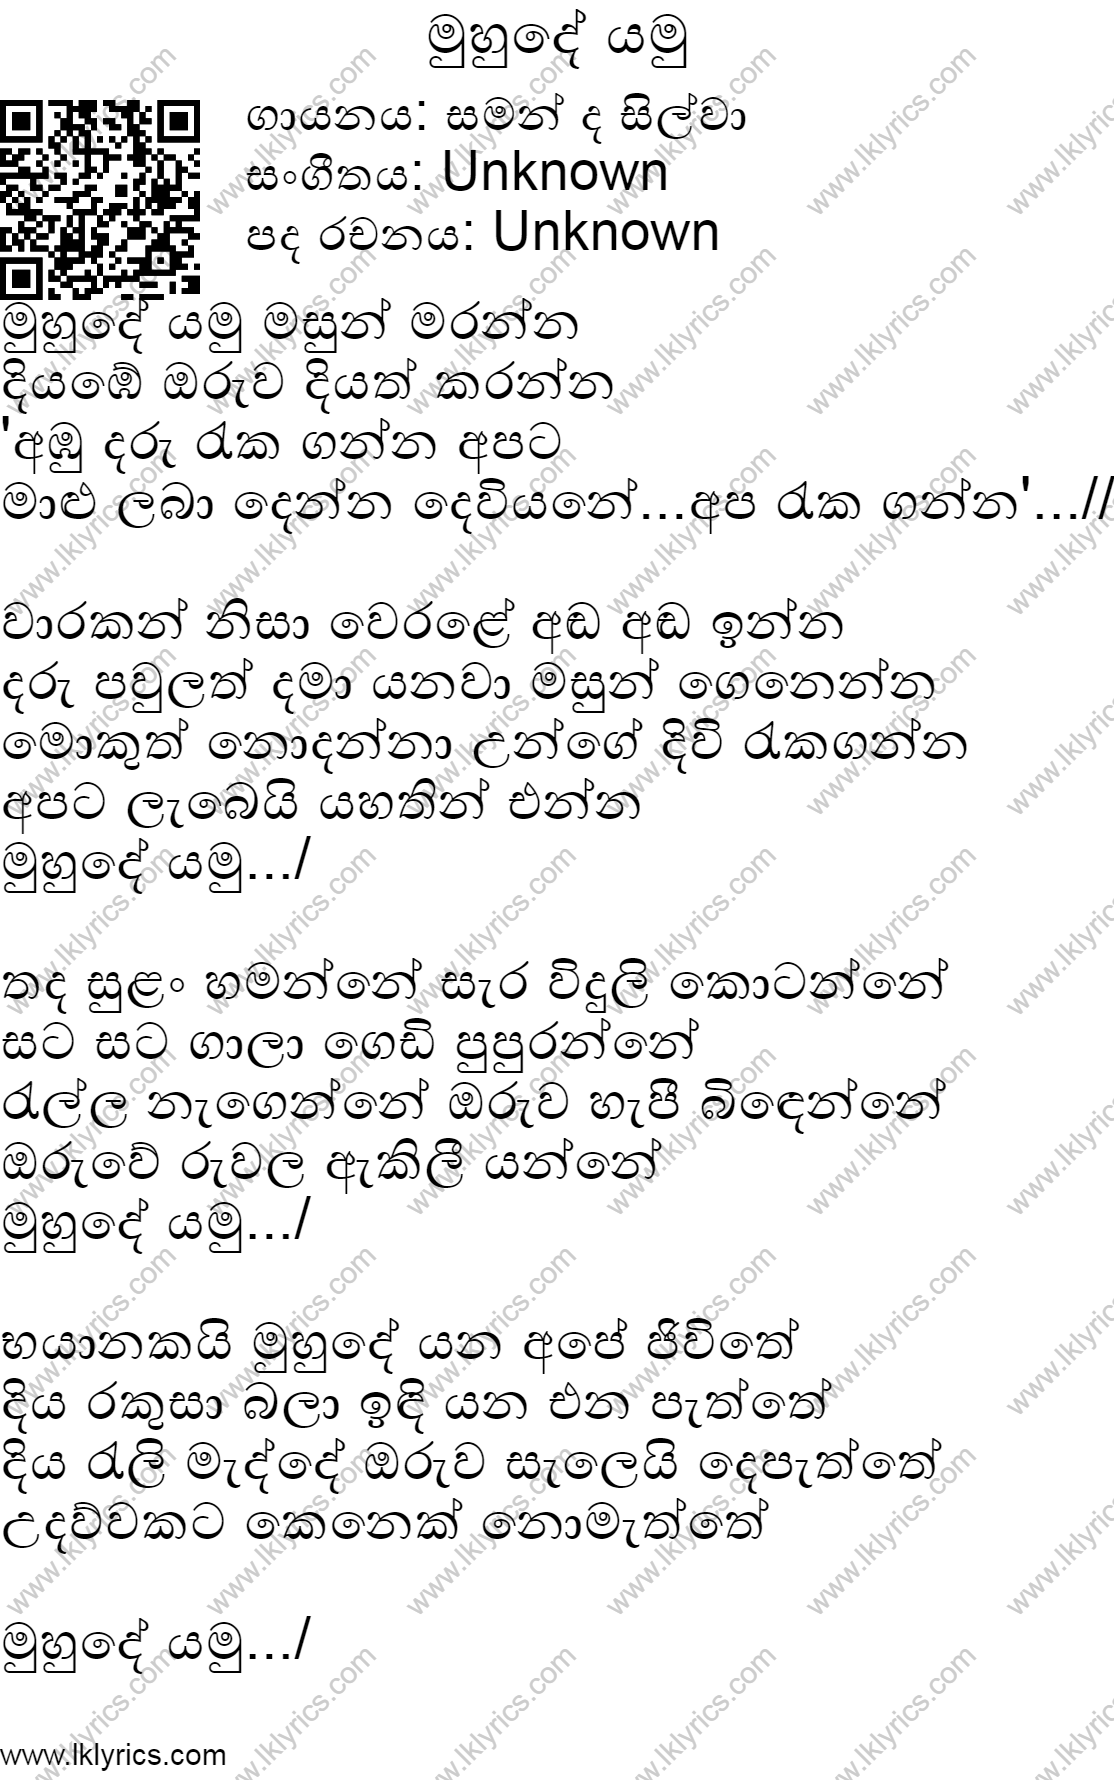 Muhude Yamu Lyrics Lk Lyrics Why don't you mention the song information in our lyrics request page. muhude yamu lyrics lk lyrics